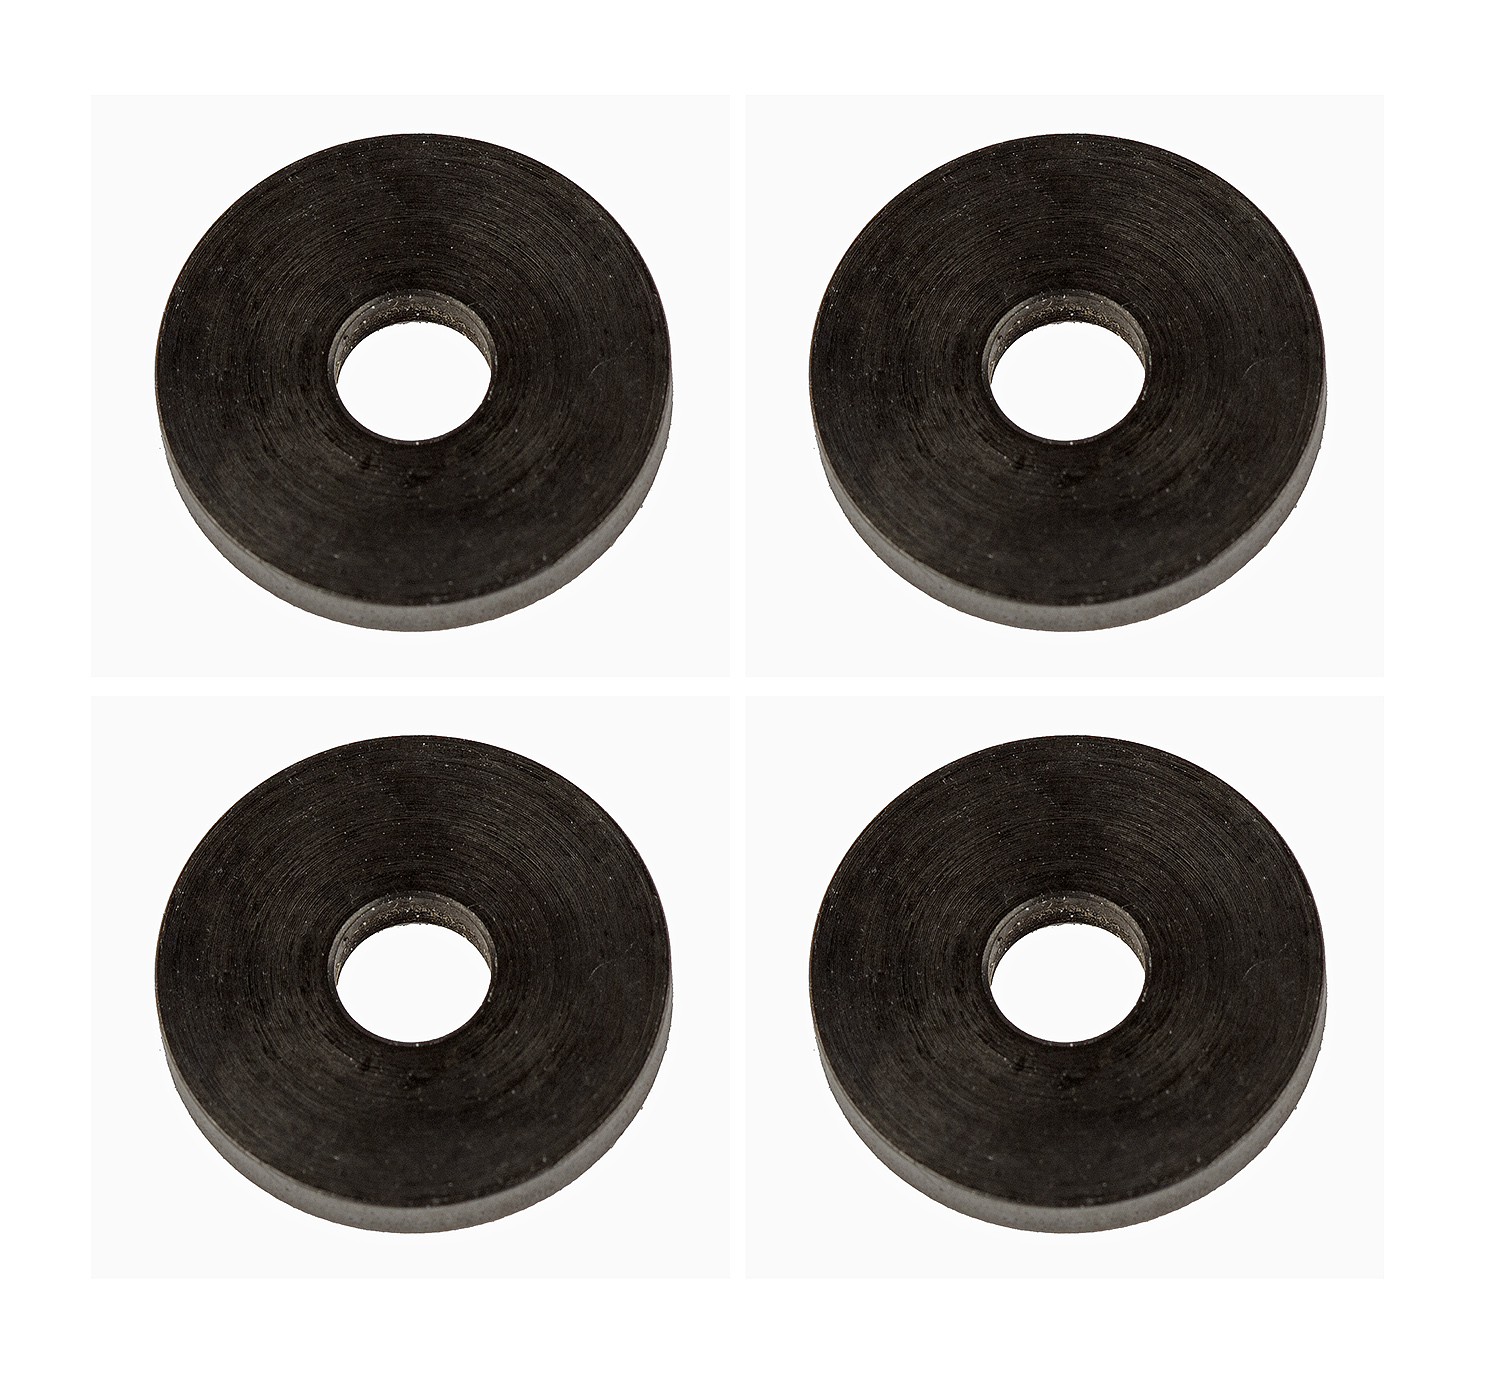 Washers, M3.6x1.6 mm, 0.06 in thick, steel